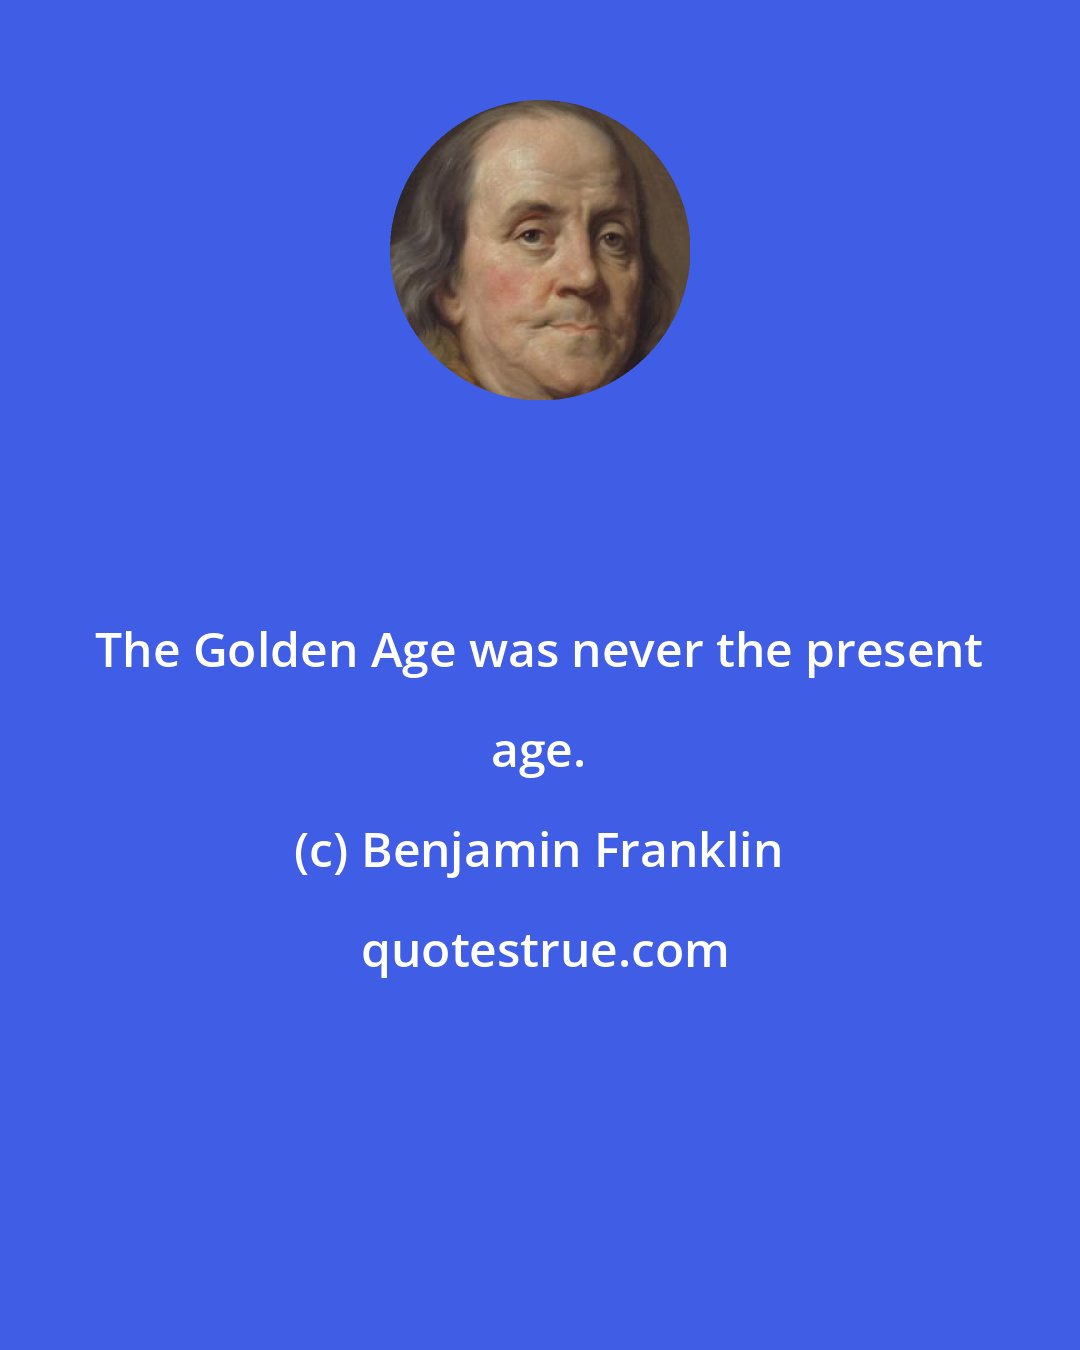 Benjamin Franklin: The Golden Age was never the present age.